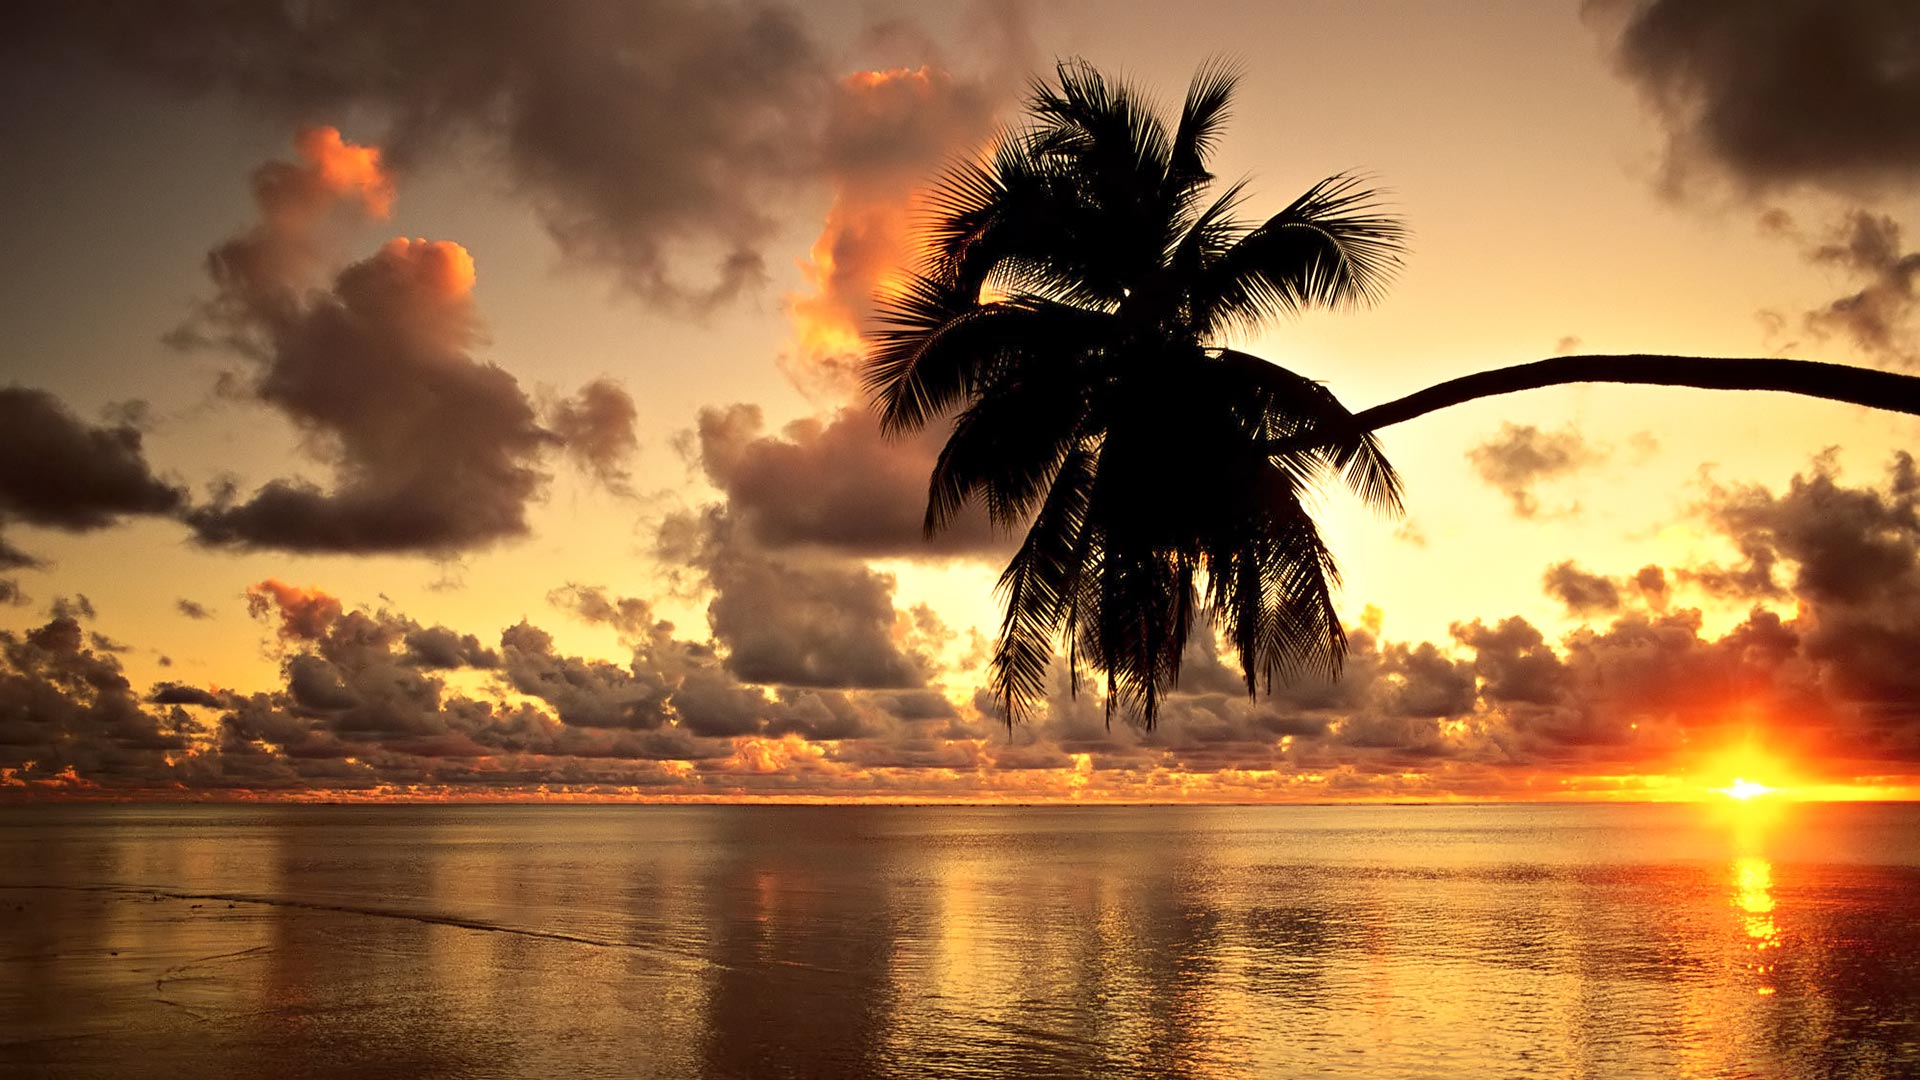 Download Free Coconut Sunset HD Wallpaper for Mobile and Desktop ...